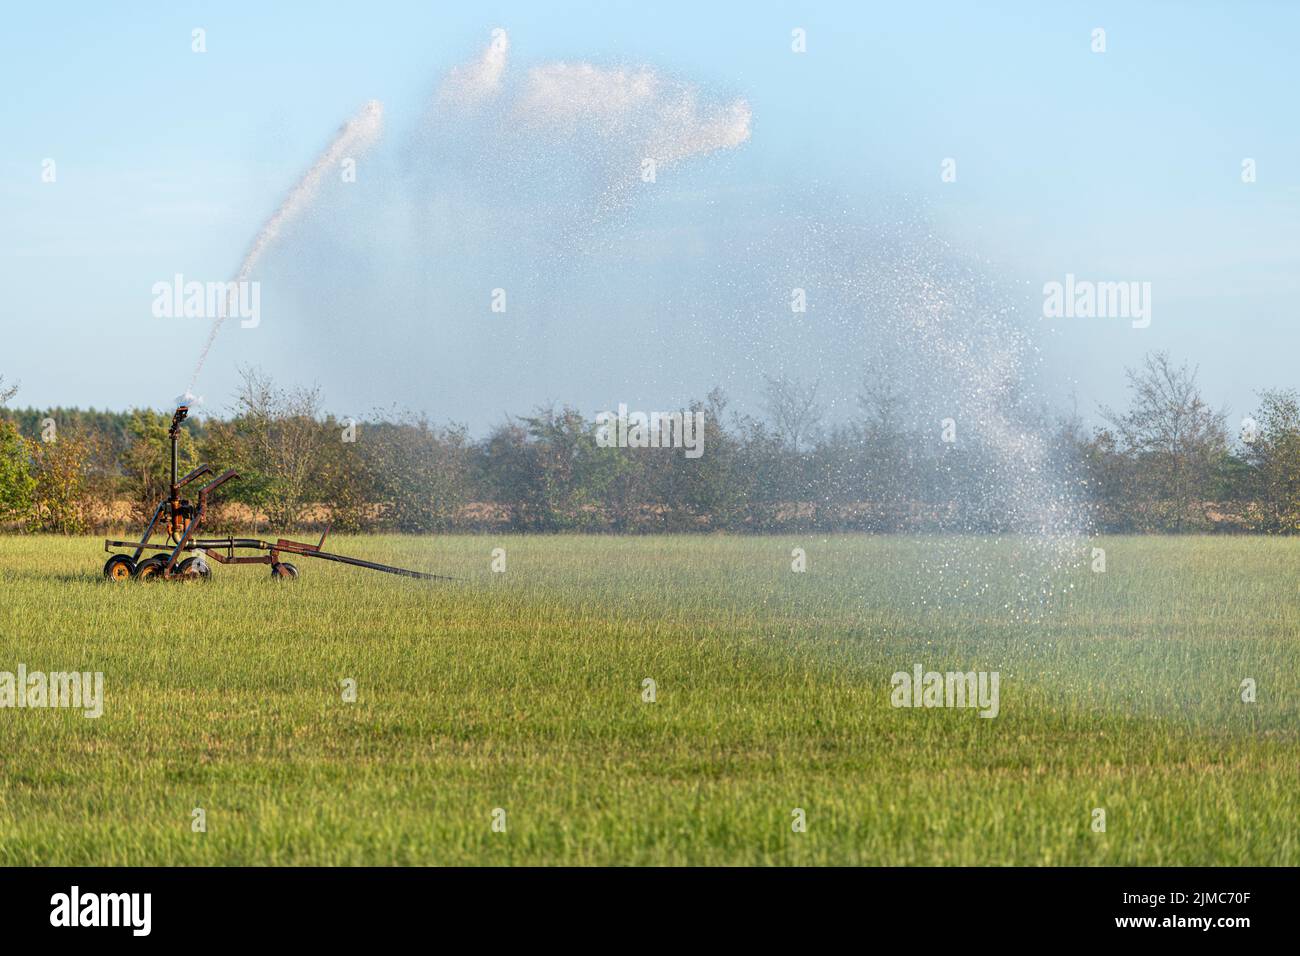 Water Sprinkler in a pasture Stock Photo